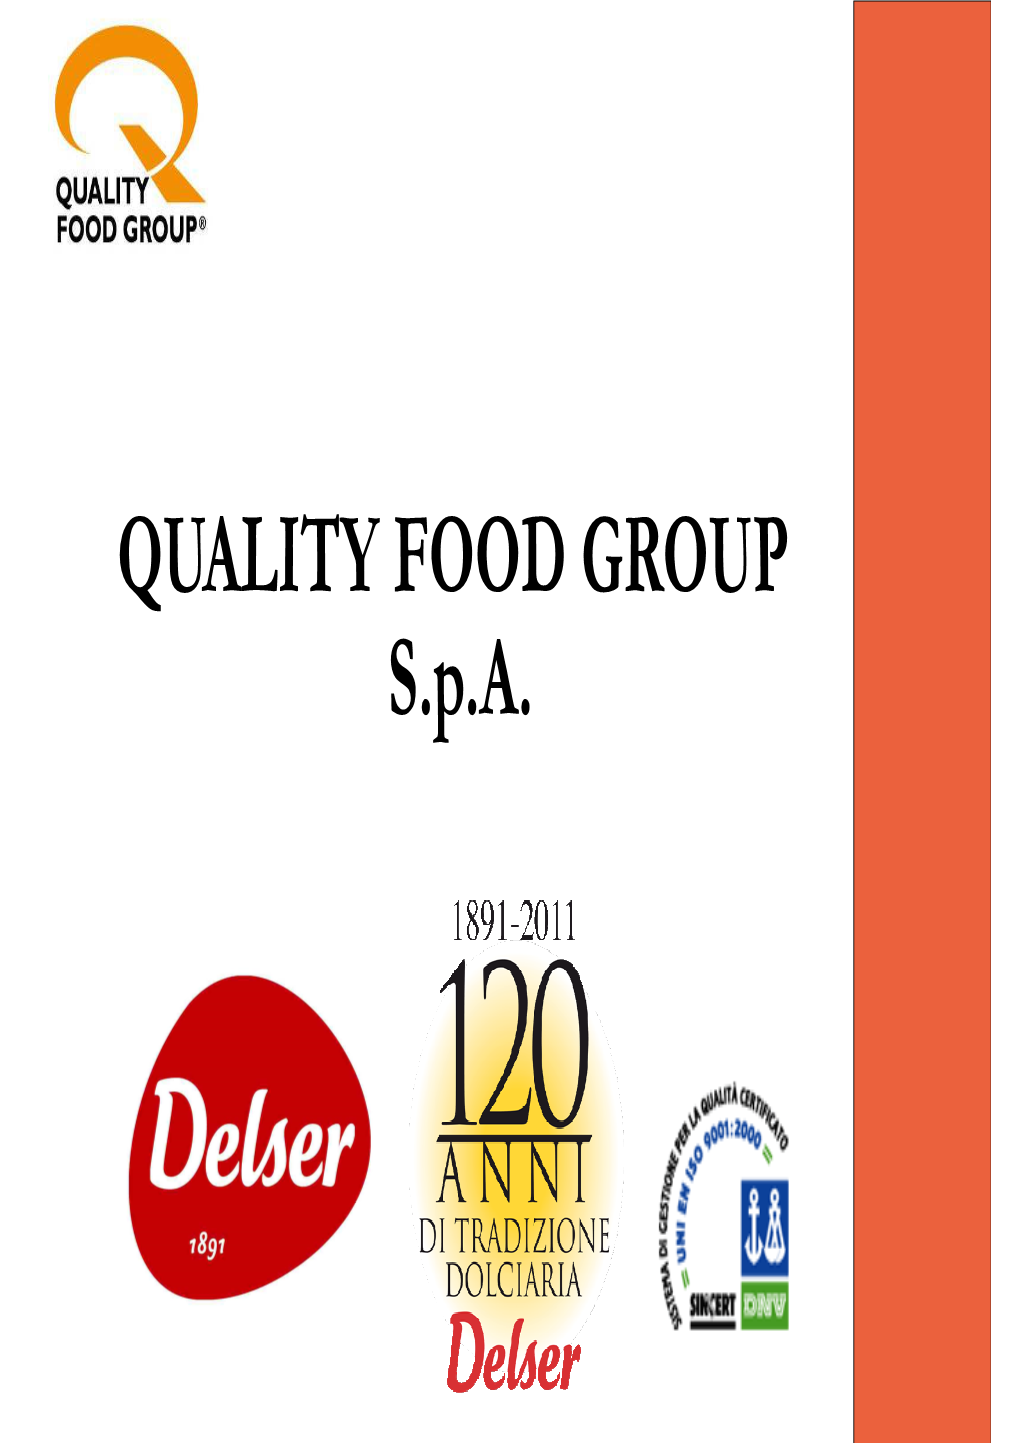 QUALITY FOOD GROUP S.P.A. the History